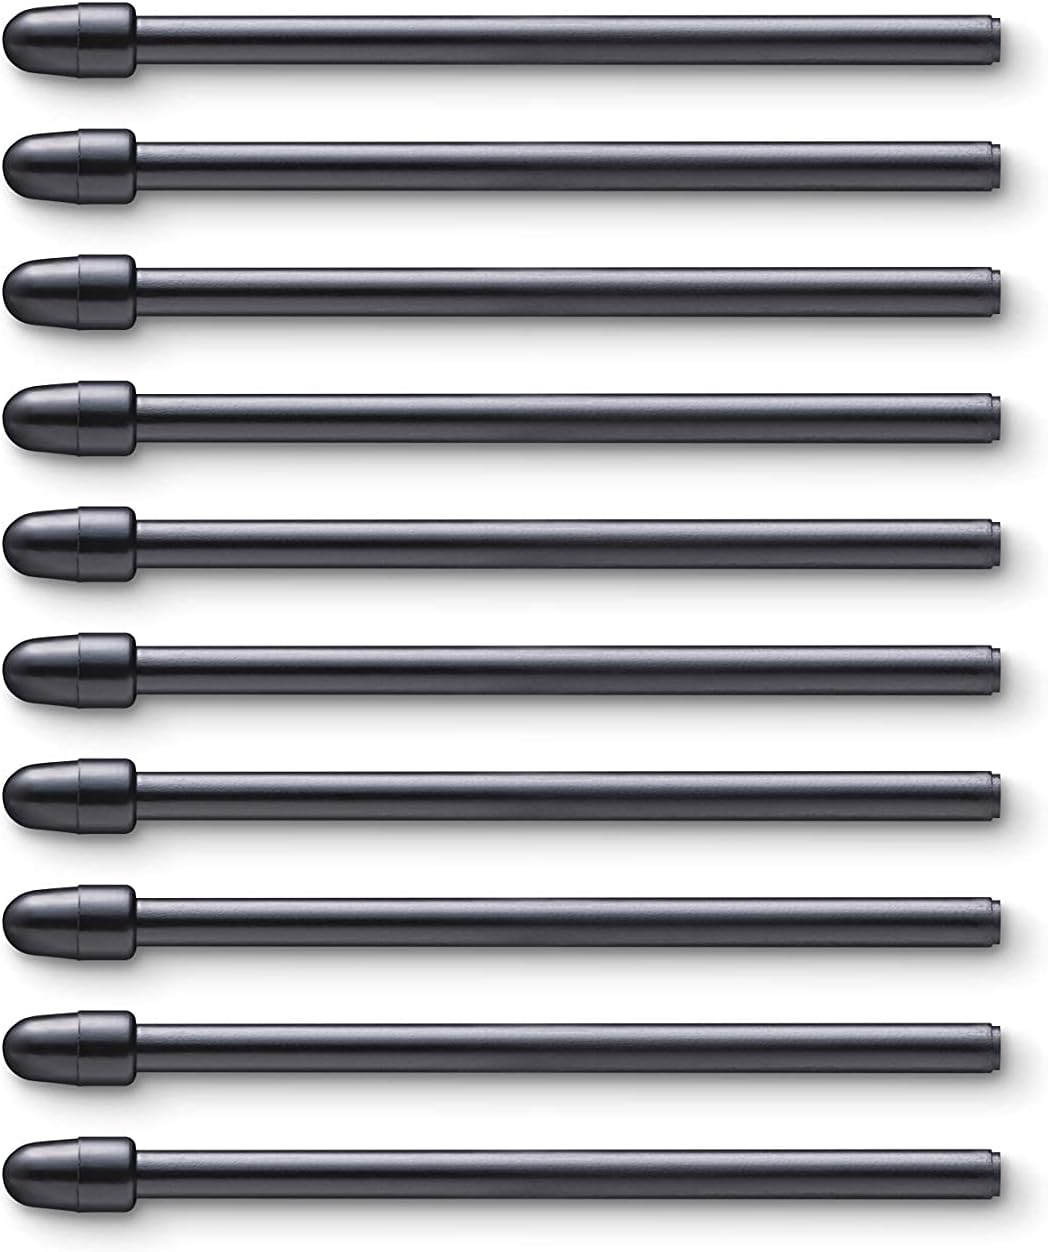 Wacom One and Dr Grip Digital Replacement nibs (Set of 10) - Good e-Reader